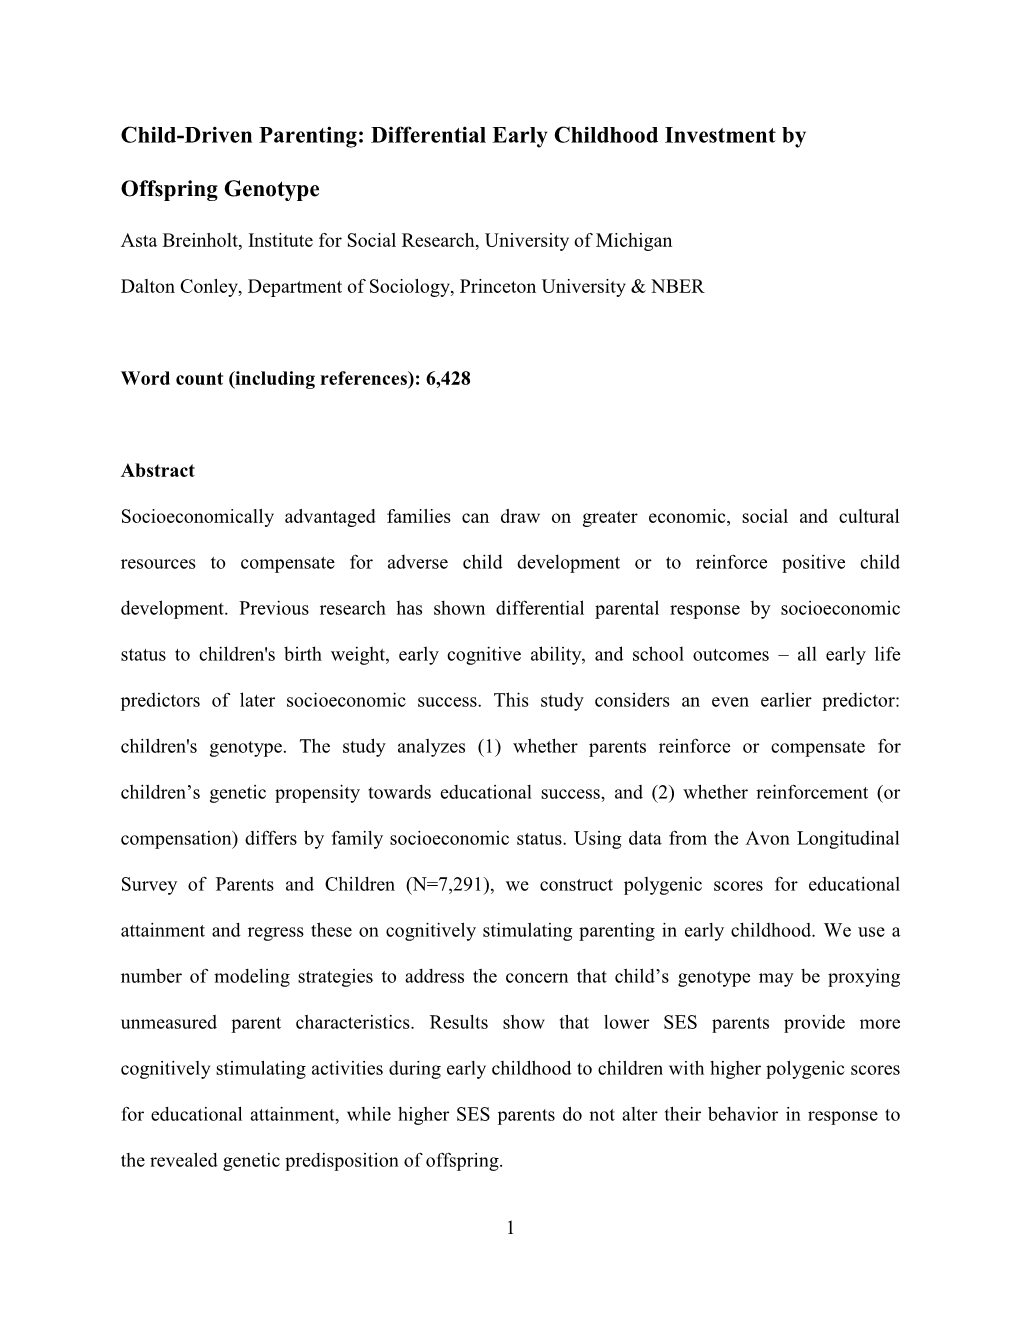 Differential Early Childhood Investment by Offspring Genotype